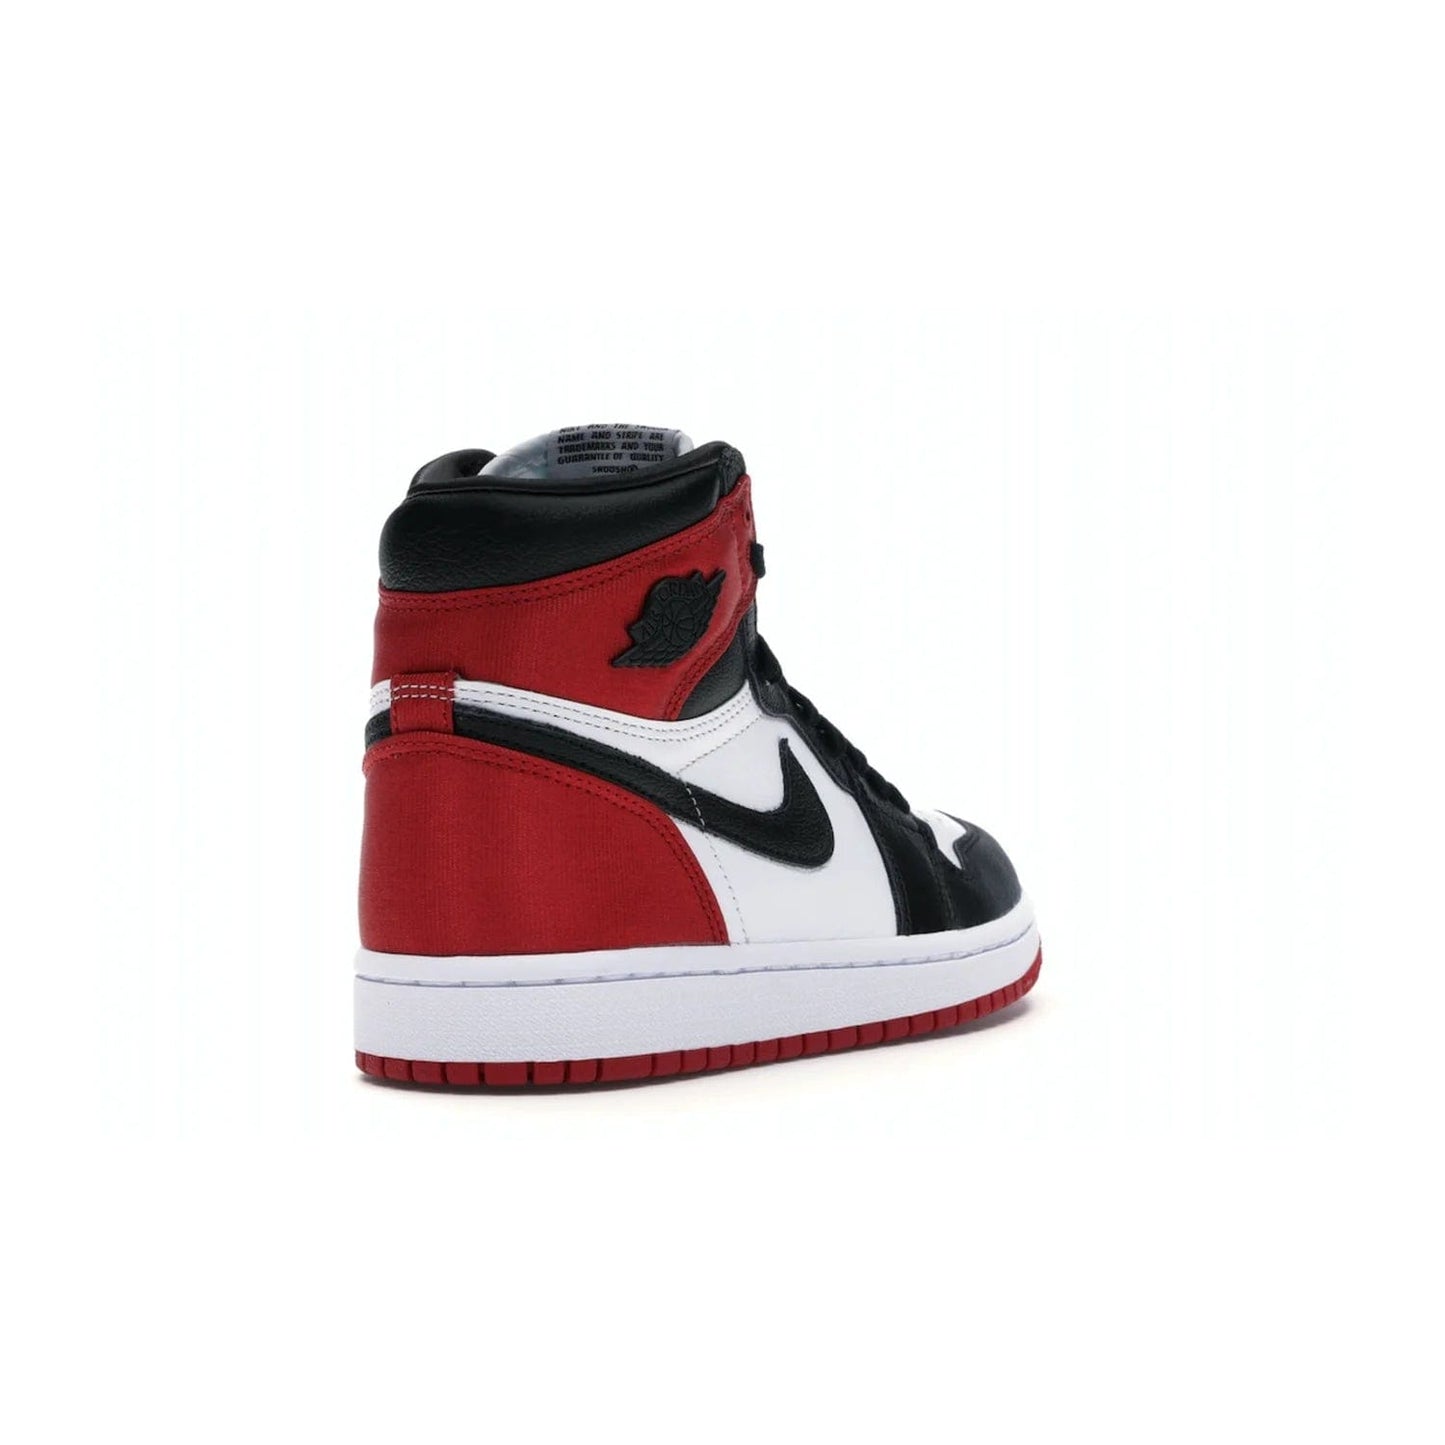 Jordan 1 Retro High Satin Black Toe (Women's) - Image 31 - Only at www.BallersClubKickz.com - Luxurious take on the timeless Air Jordan 1. Features a mix of black leather and satin materials with subtle University Red accents. Elevated look with metal Wings logo on the heel. Released in August 2019.